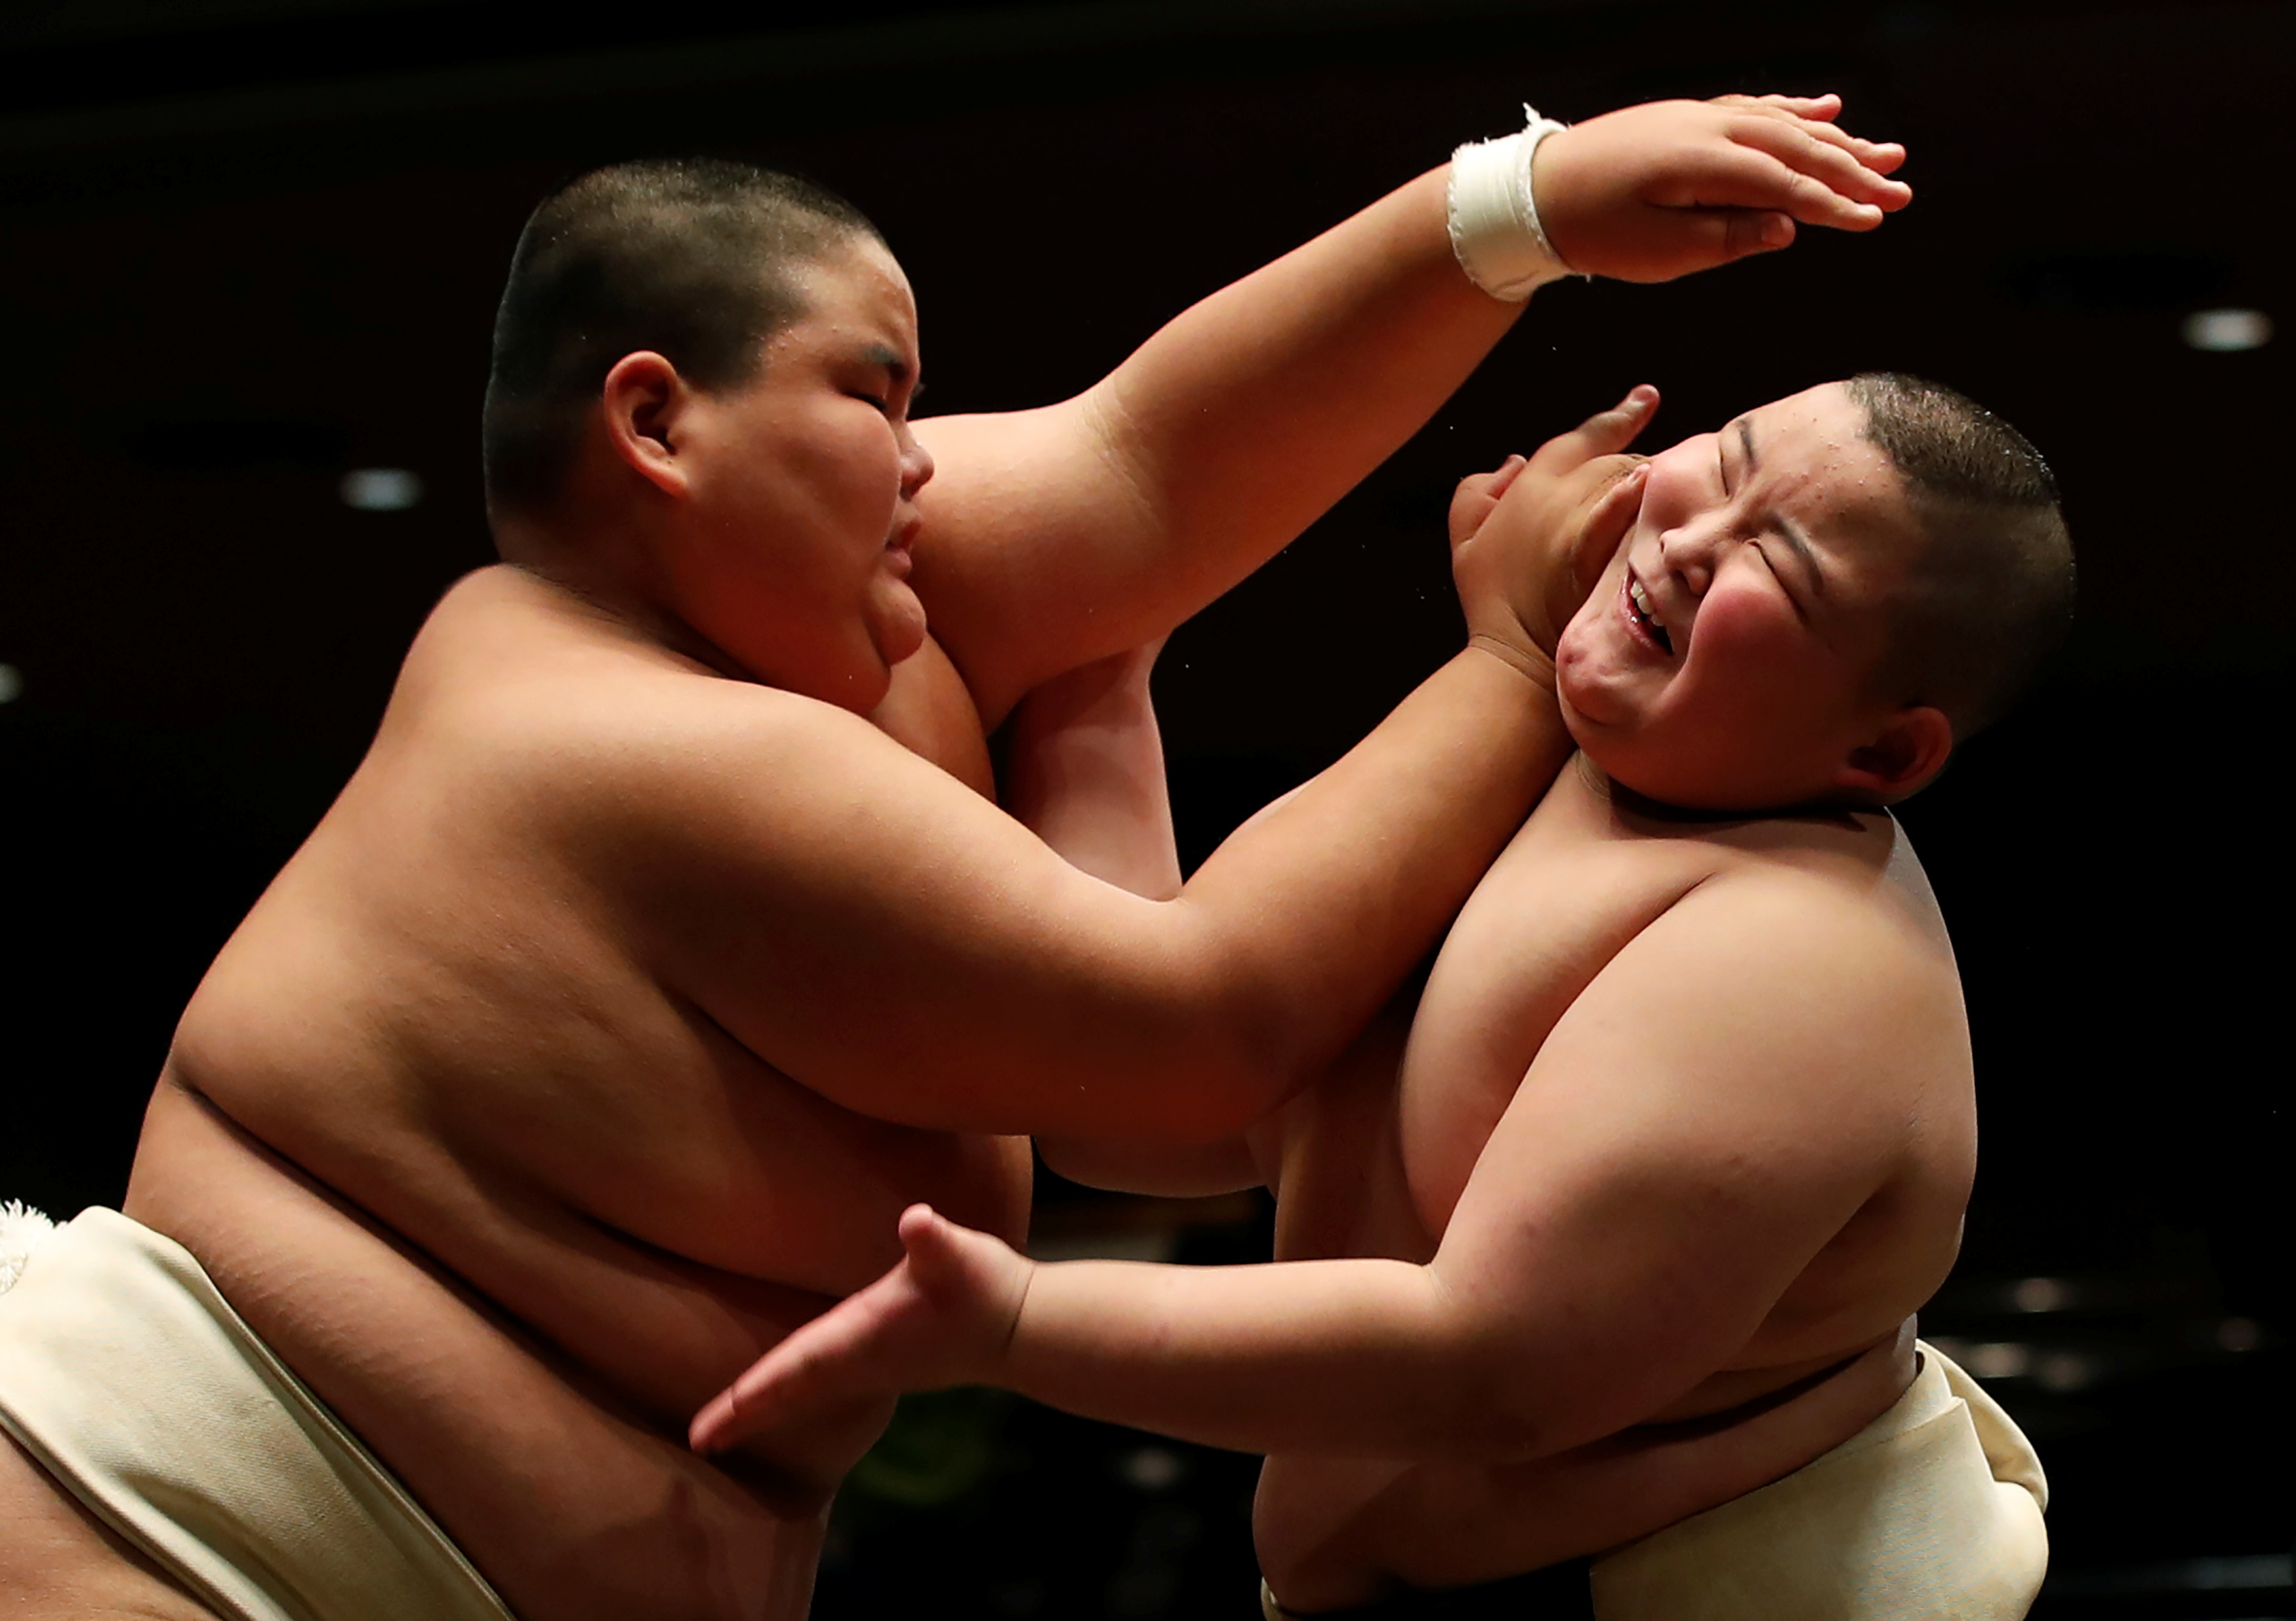 Japanese boy sumo wrestlers chase dreams of fame and fortune | Reuters